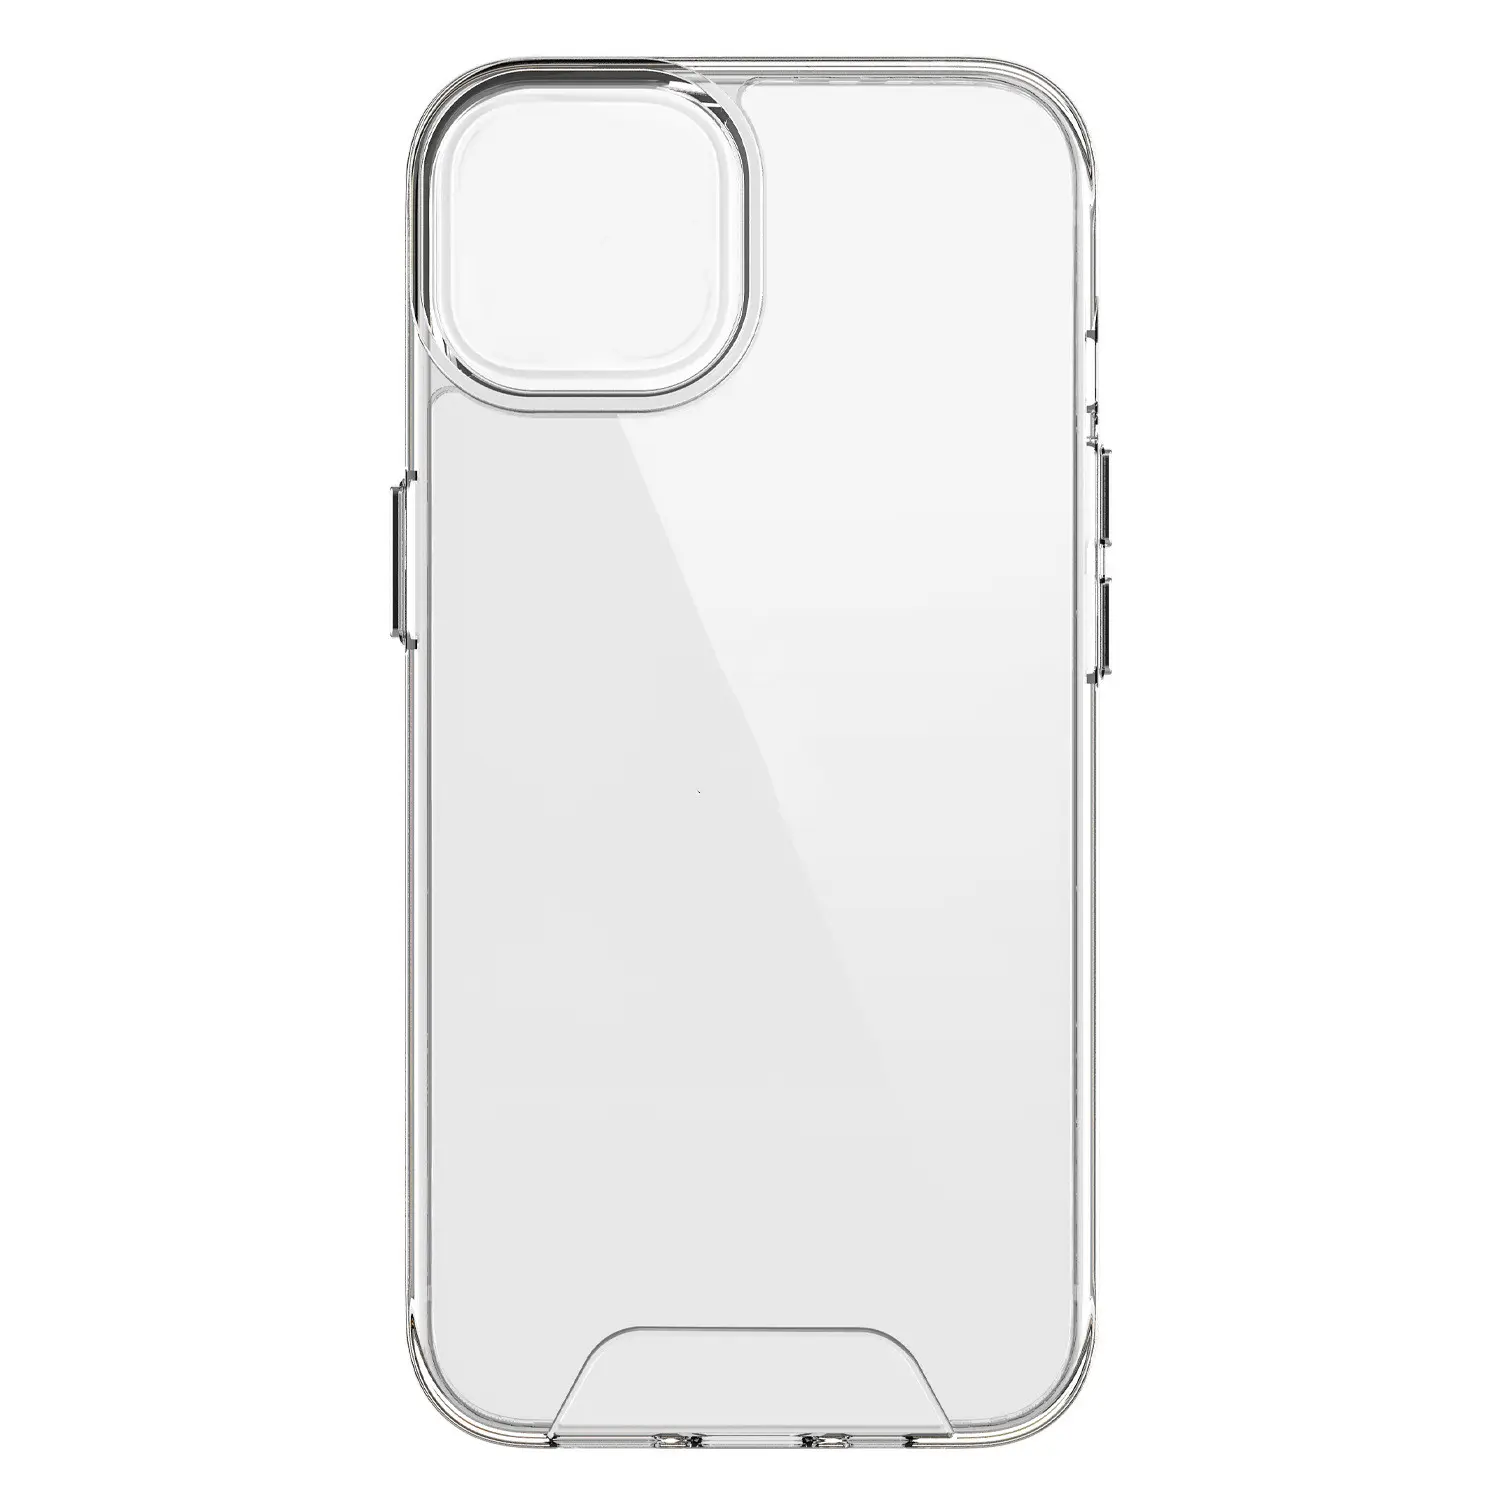 GS Clear Case For Motorola Edge 30 Moto G10 Shockproof Luxury Style Mobile Phone Case Clear Back Cover PC Case